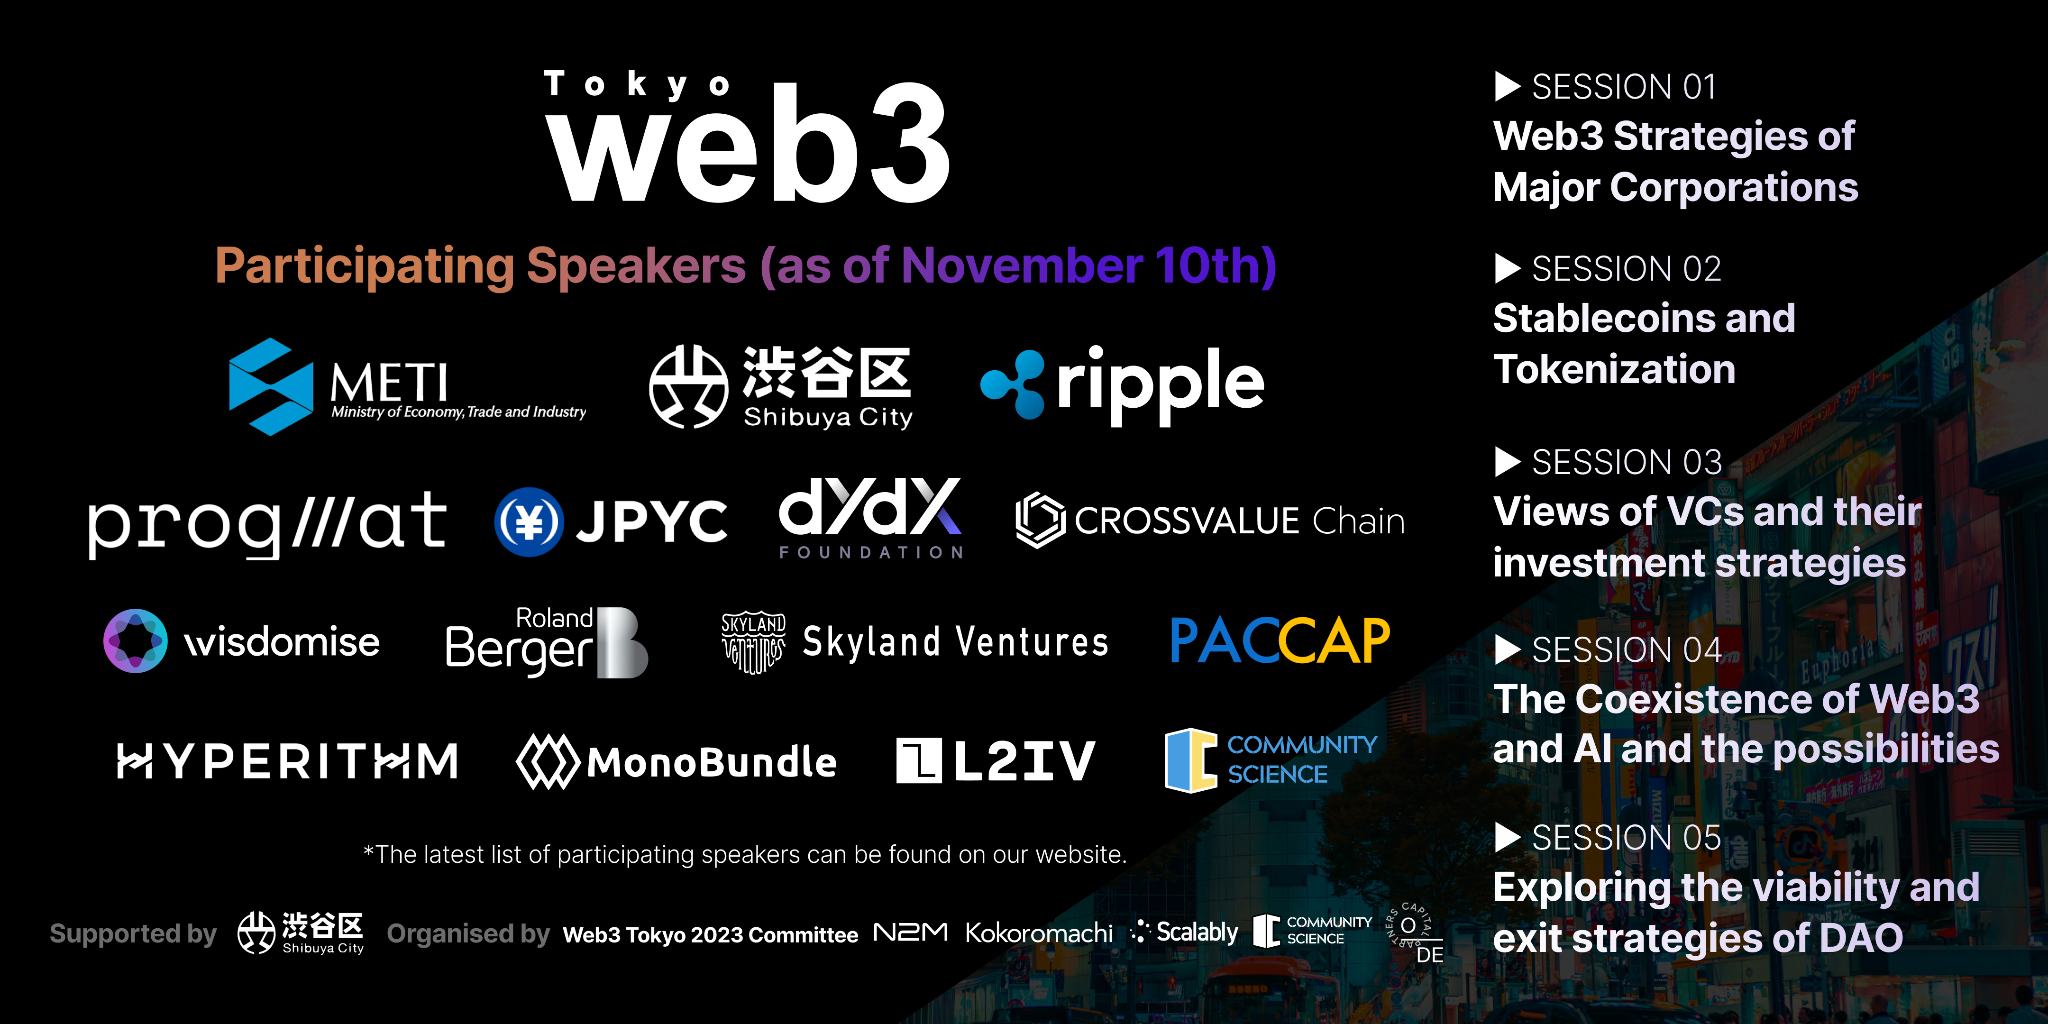 Online Global Web3 Conference “Web3 Tokyo 2023” held on the 9th of December, 2023